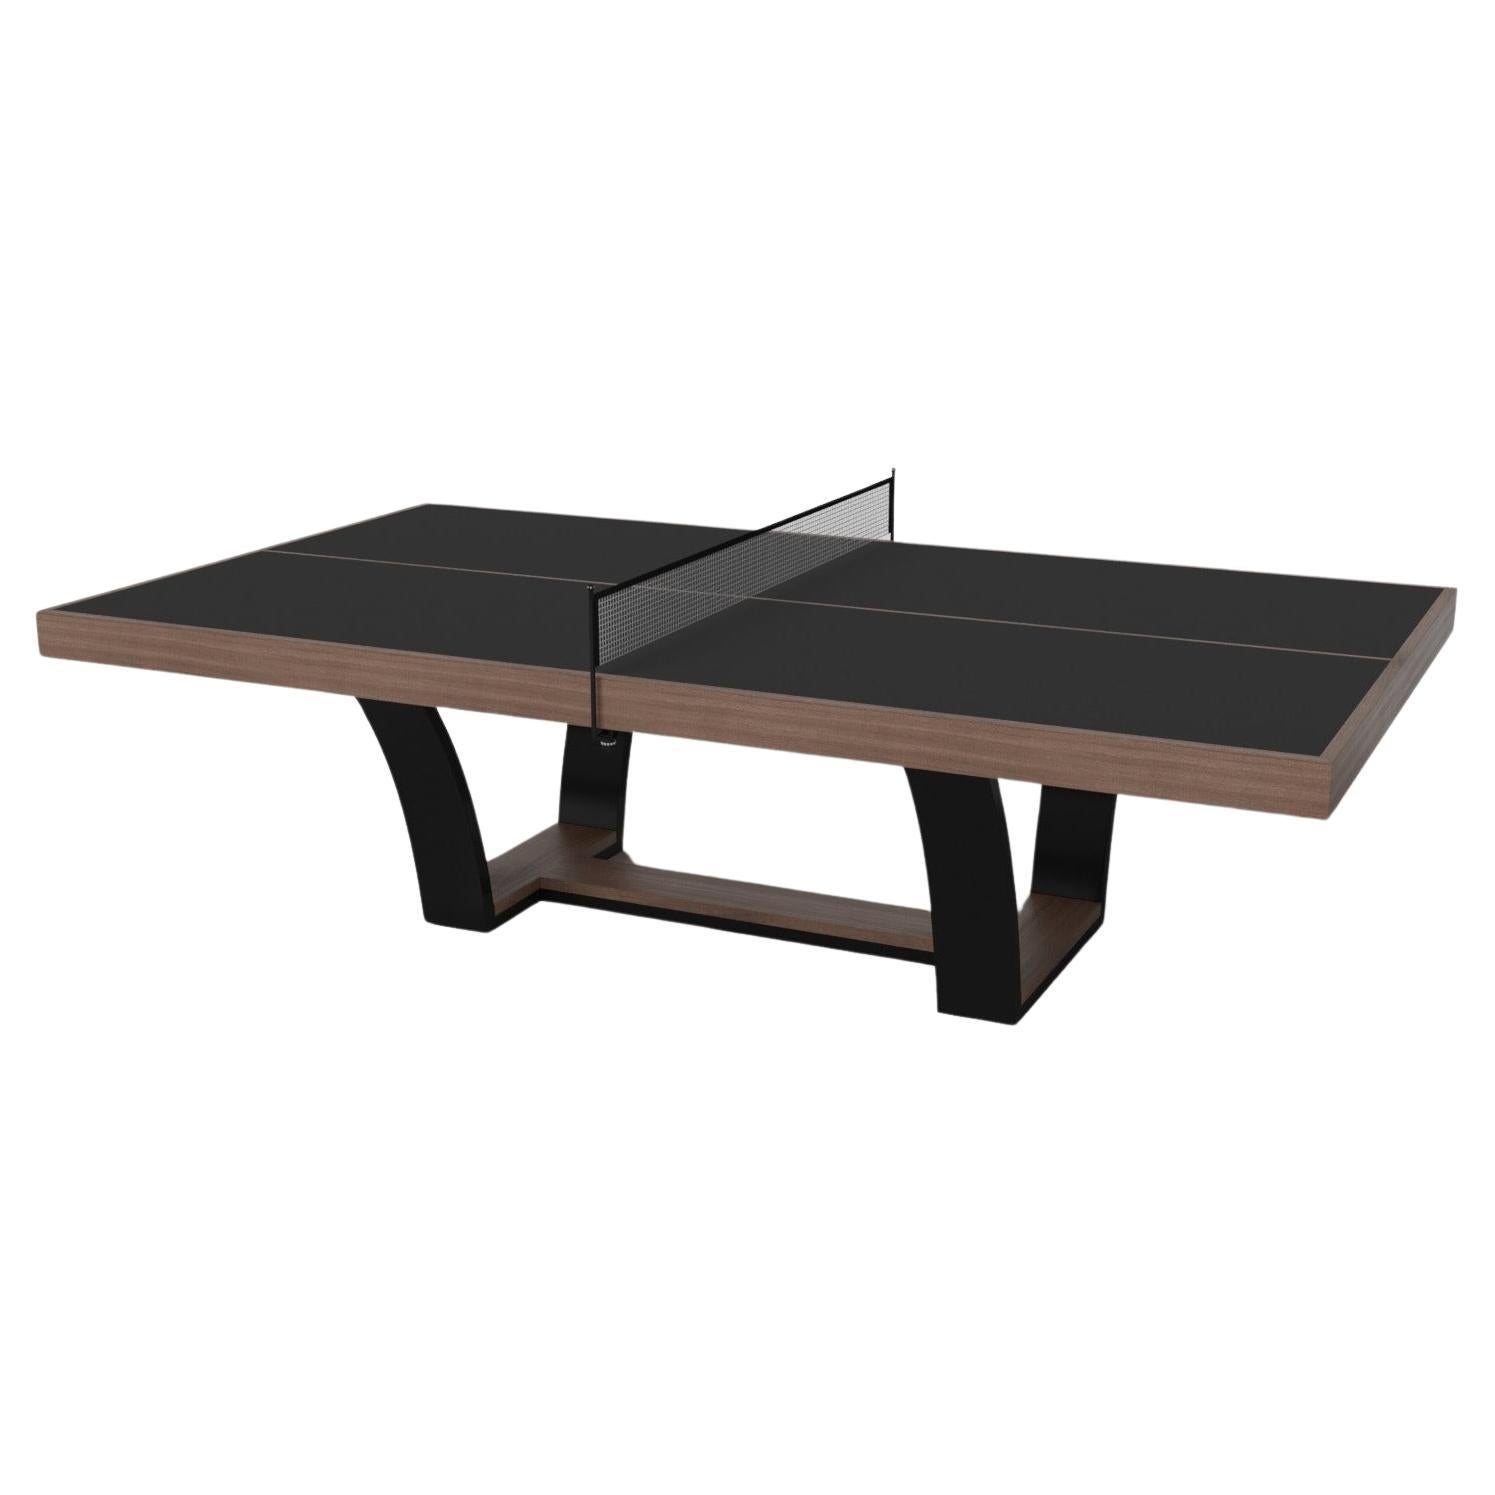 Elevate Customs Elite Tennis Table / Solid Walnut Wood in 9' - Made in USA